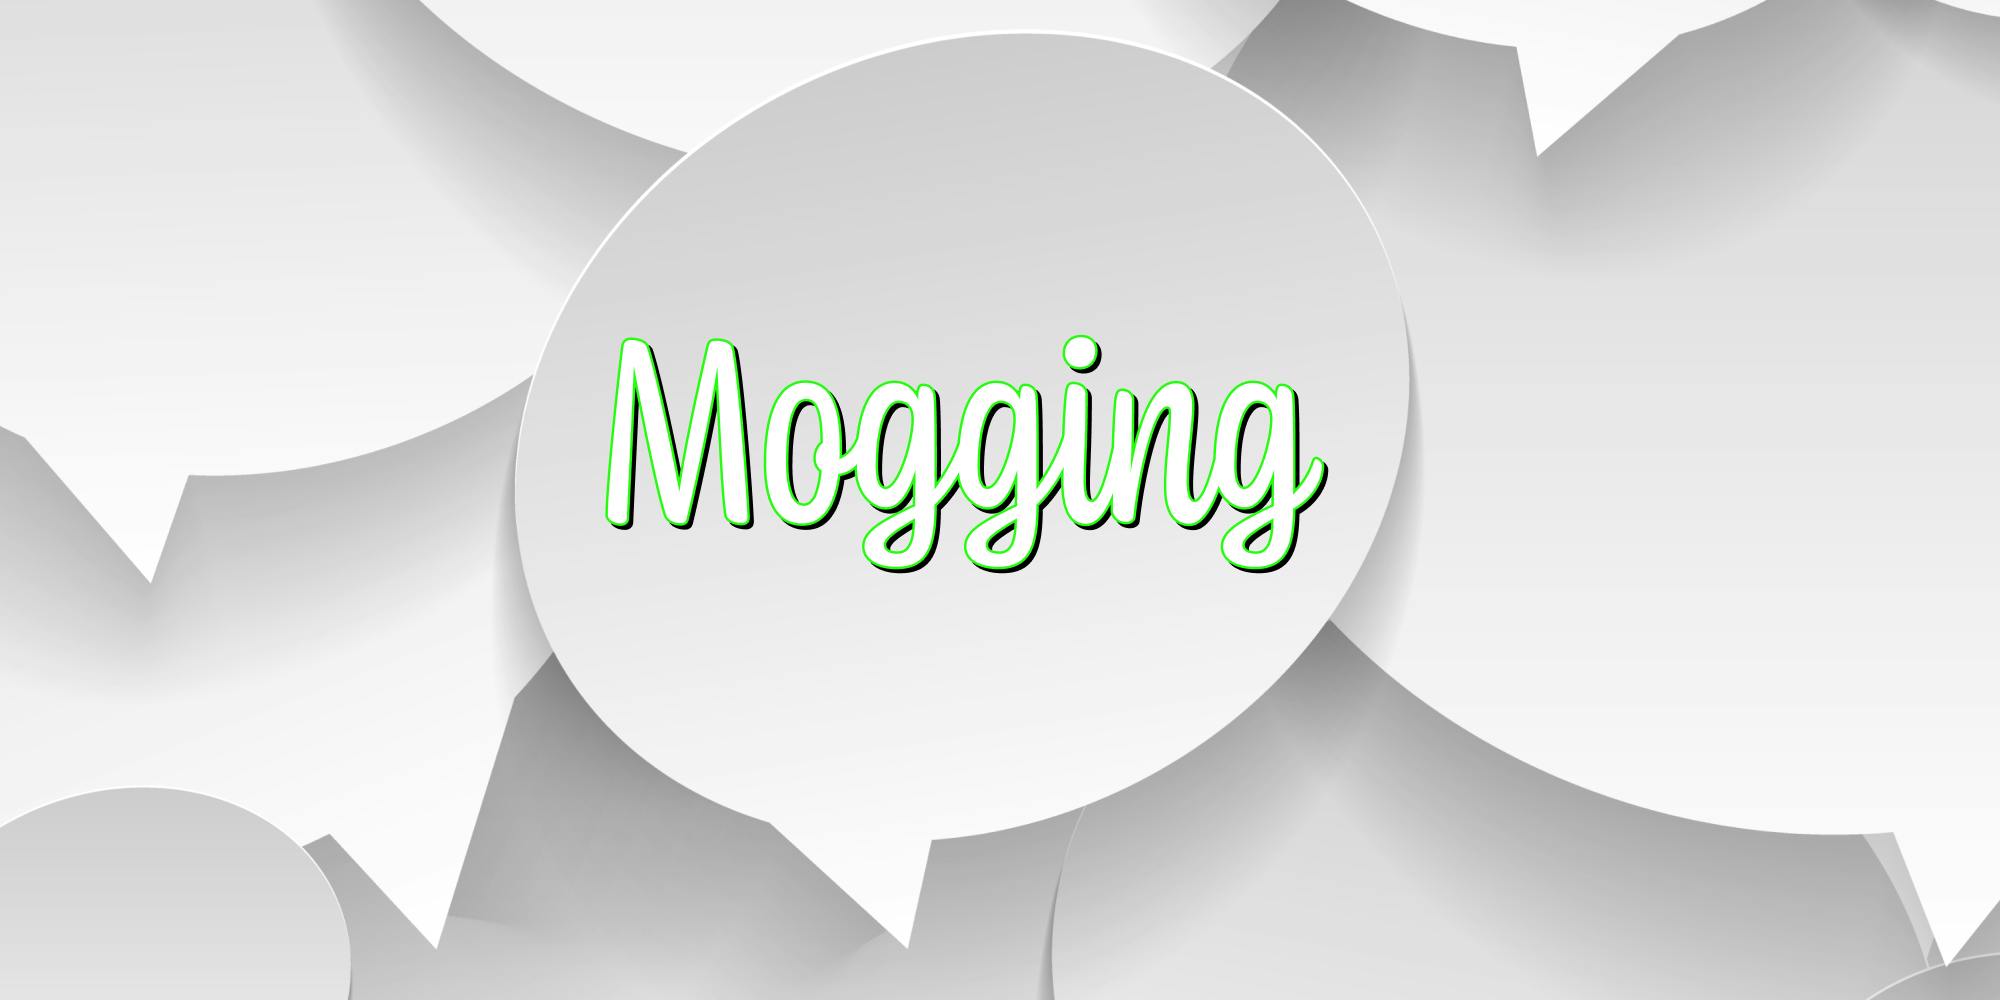 What does mogging mean?